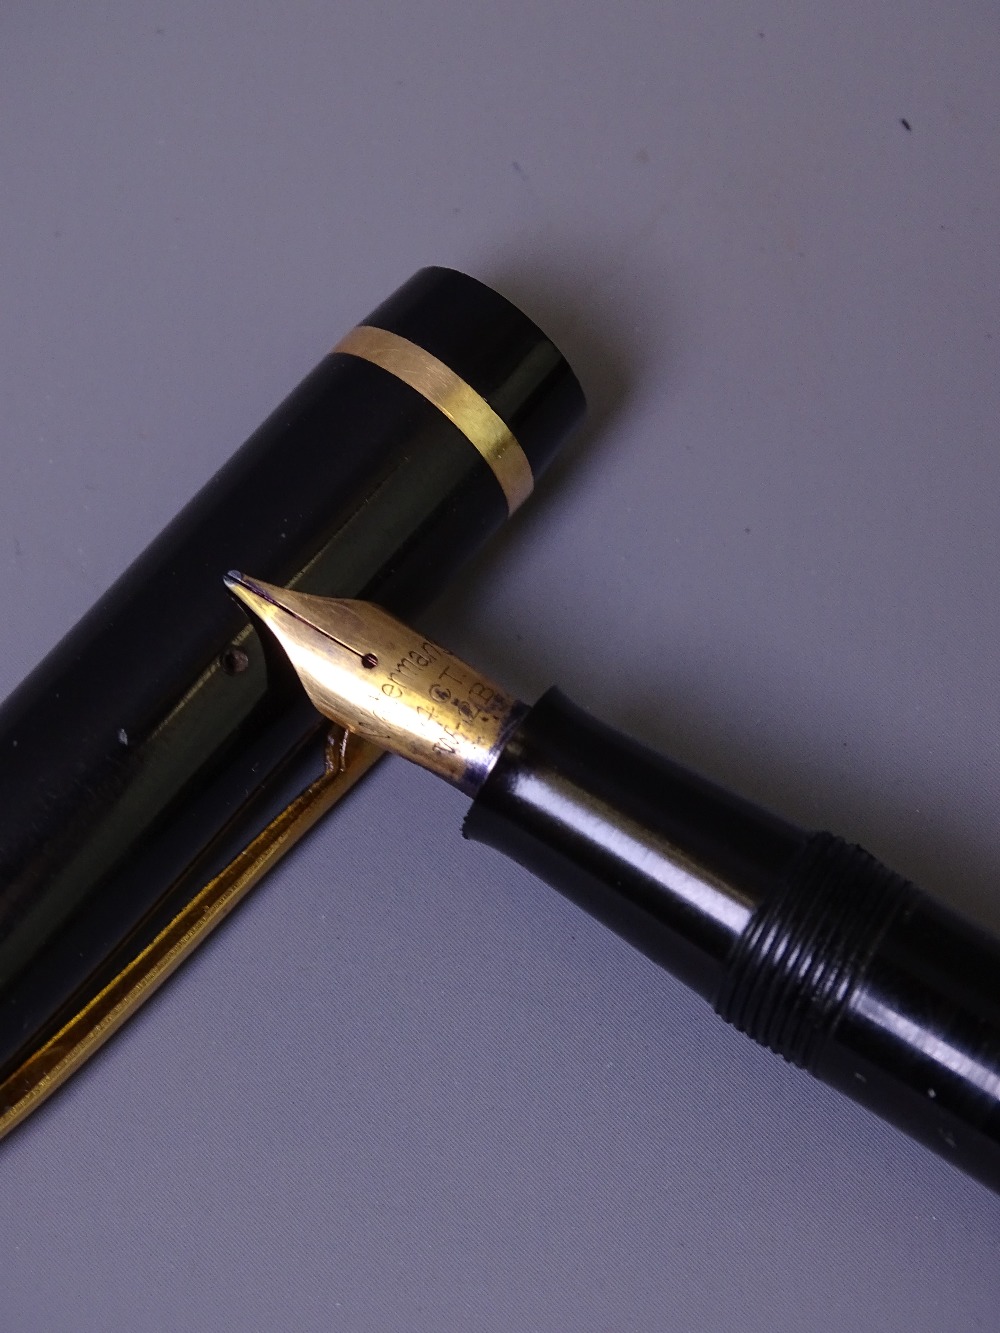 WATERMAN - Vintage (late 1940s-50s) Black Waterman W5 fountain pen with gold plated trim and - Image 3 of 5